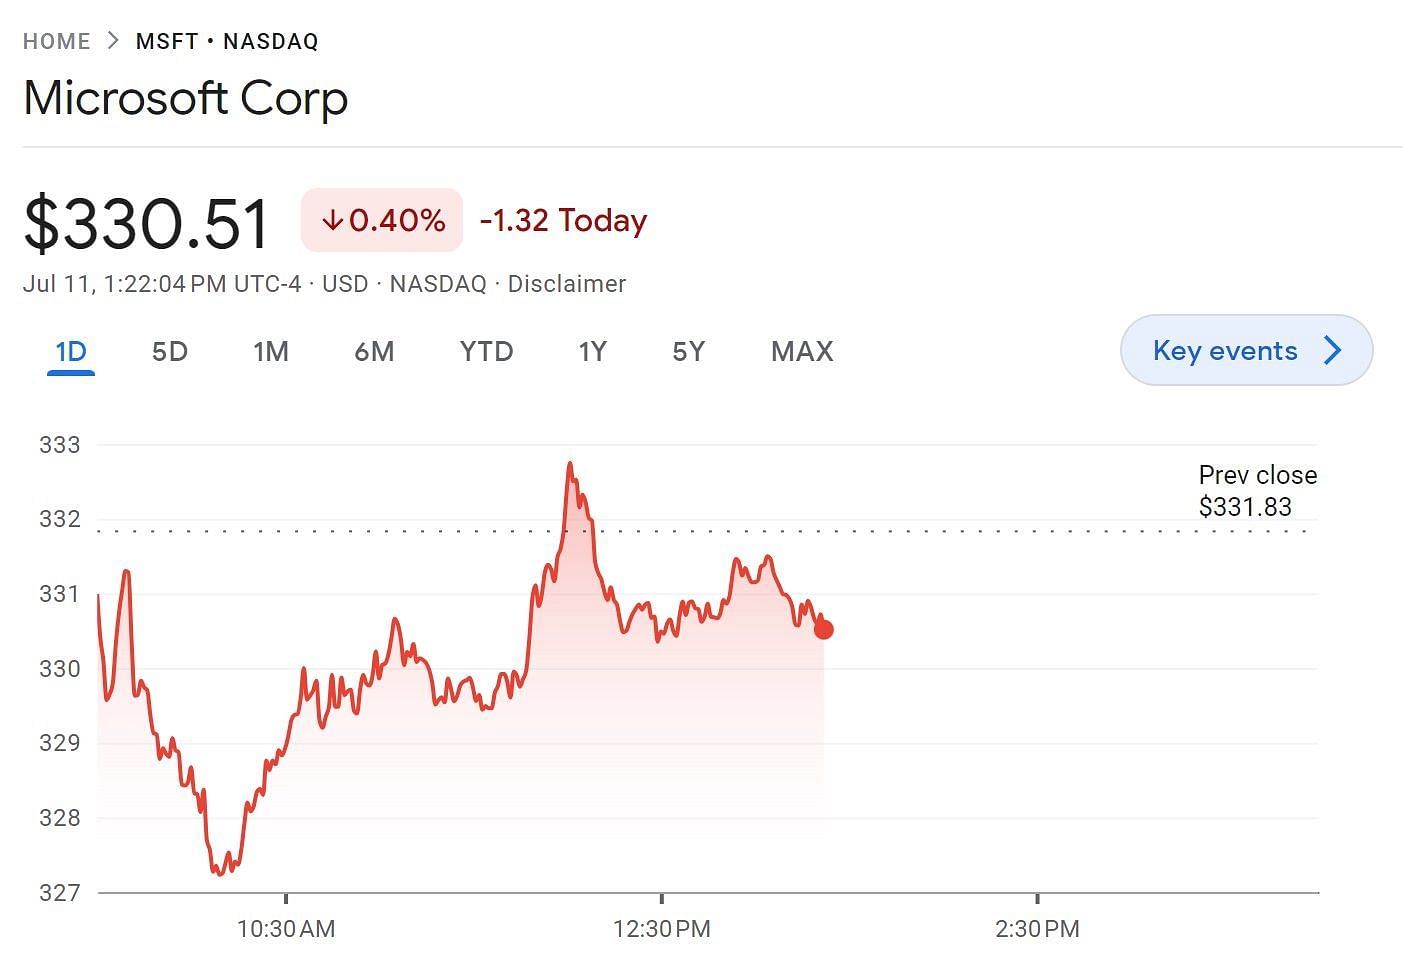 Microsoft&#039;s stock price after the dismissal of FTC&#039;s injunction by judge Jaqueline Scott Corley (Image via Google Finance)